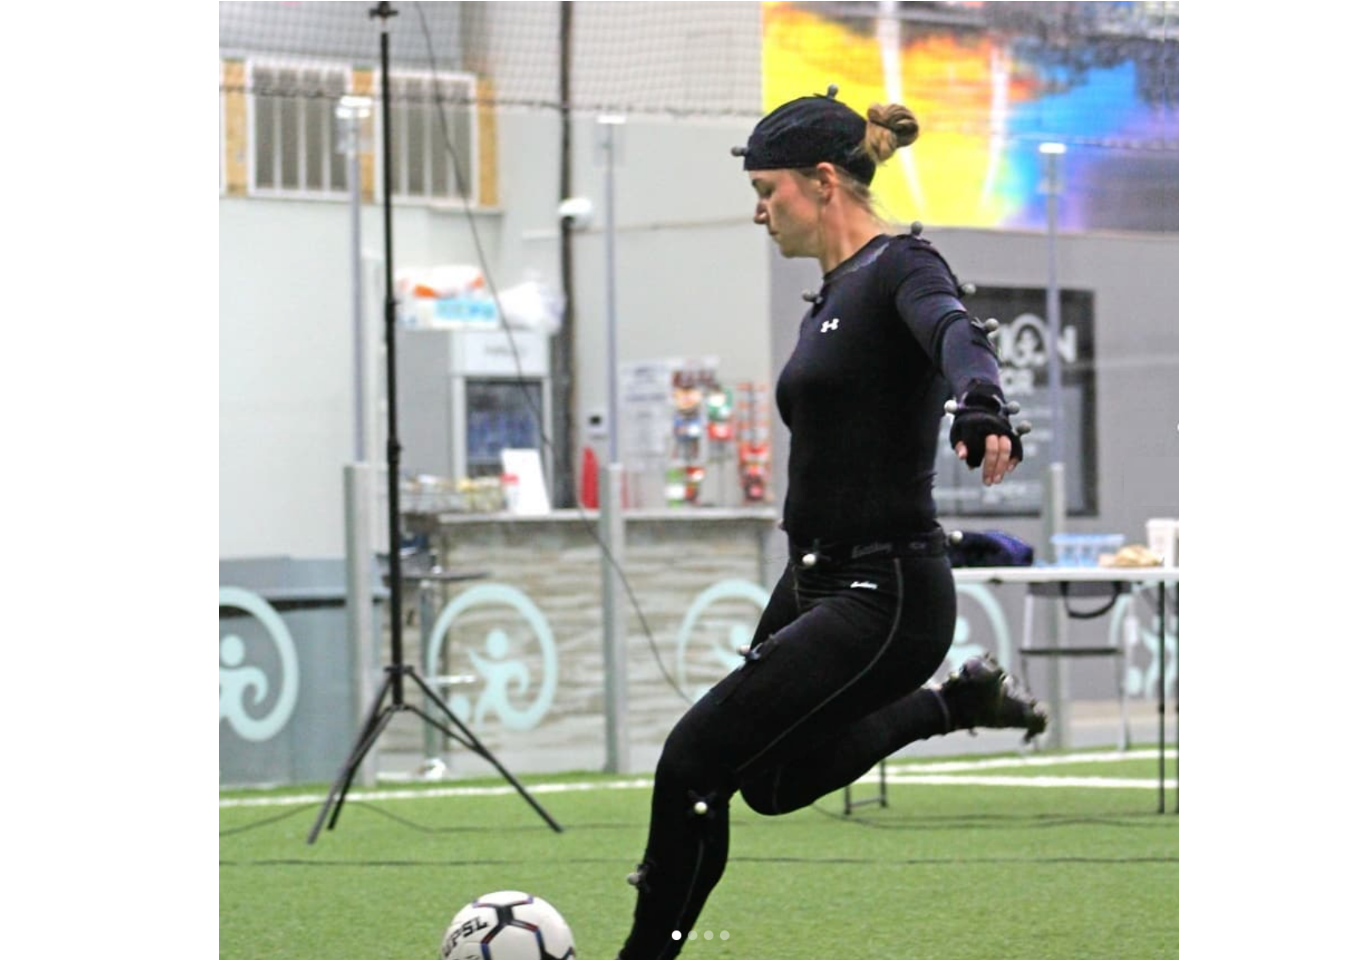 woman in mocap compression suit kicking a soccer ball